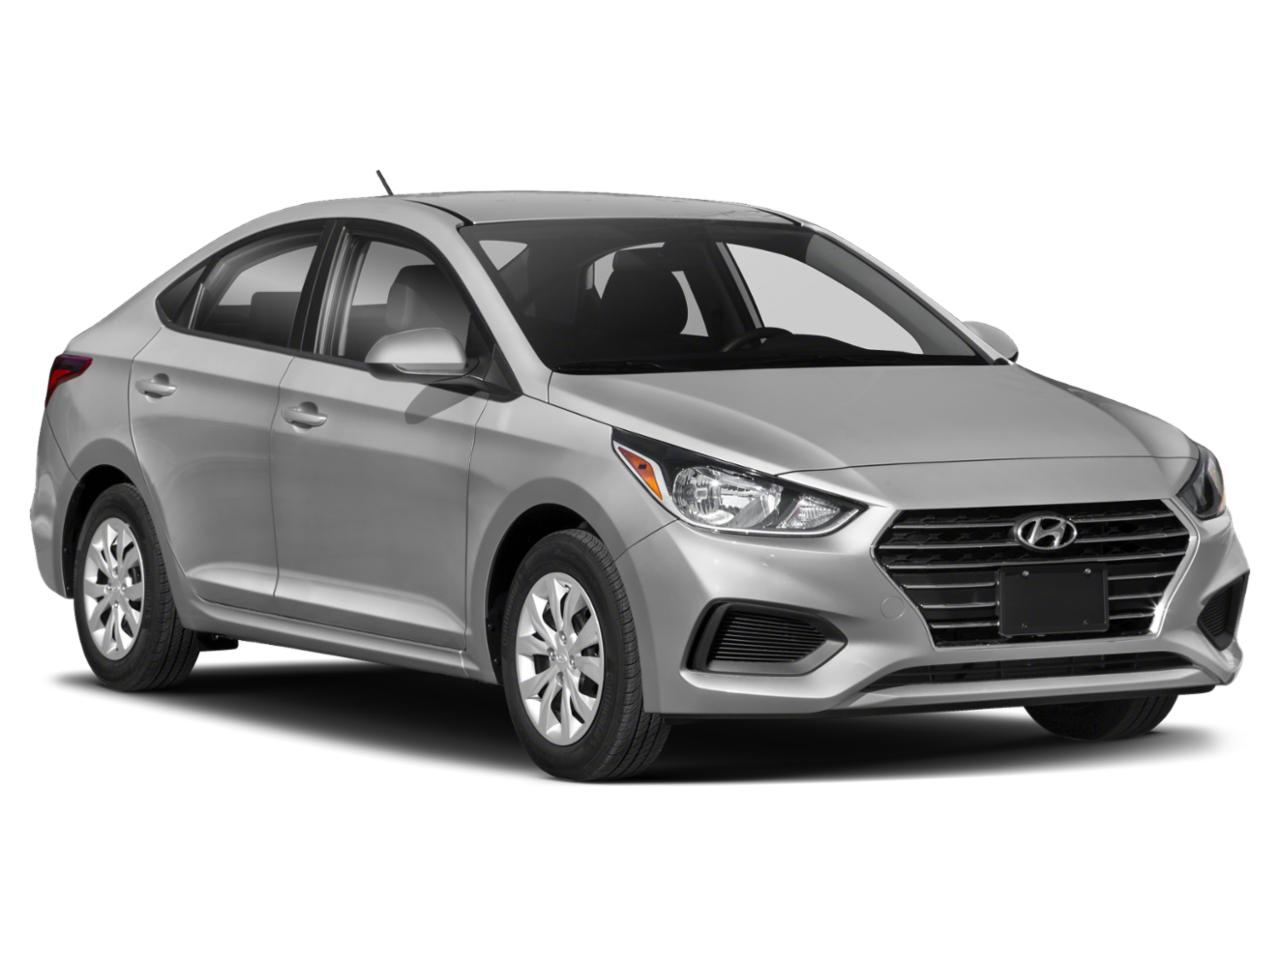 New 2021 Absolute Black Hyundai Accent For Sale in Quakertown | ME137585